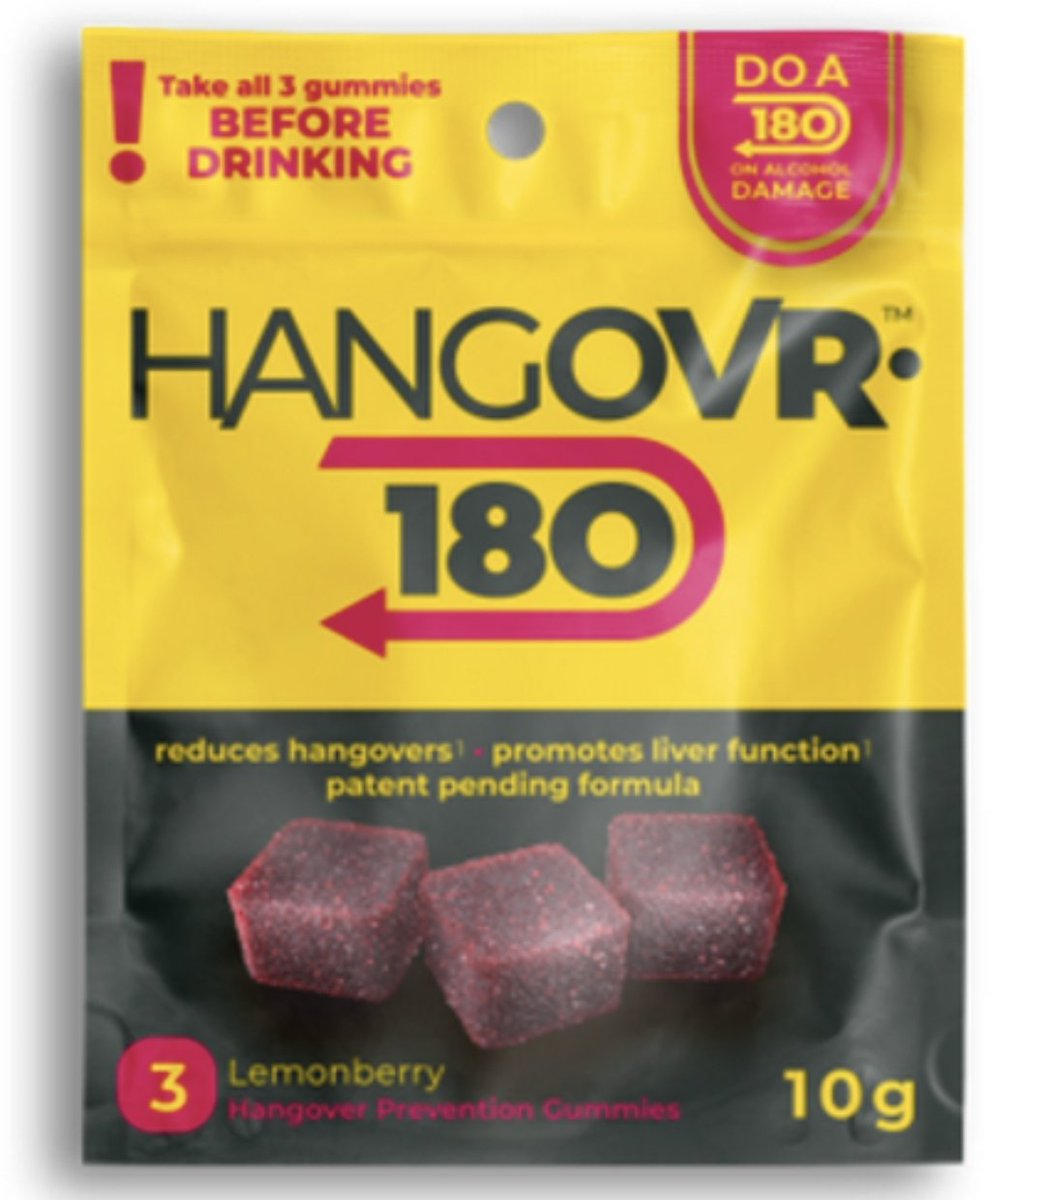 #DayOfTheDeployed As we approach WW3 our men and women will probably get drunk. So send them a pack of Hangover 180 so they are ready for the fight the next day. Contact me to order! #hangover #hangovercures #DroppiiUSA #hungover